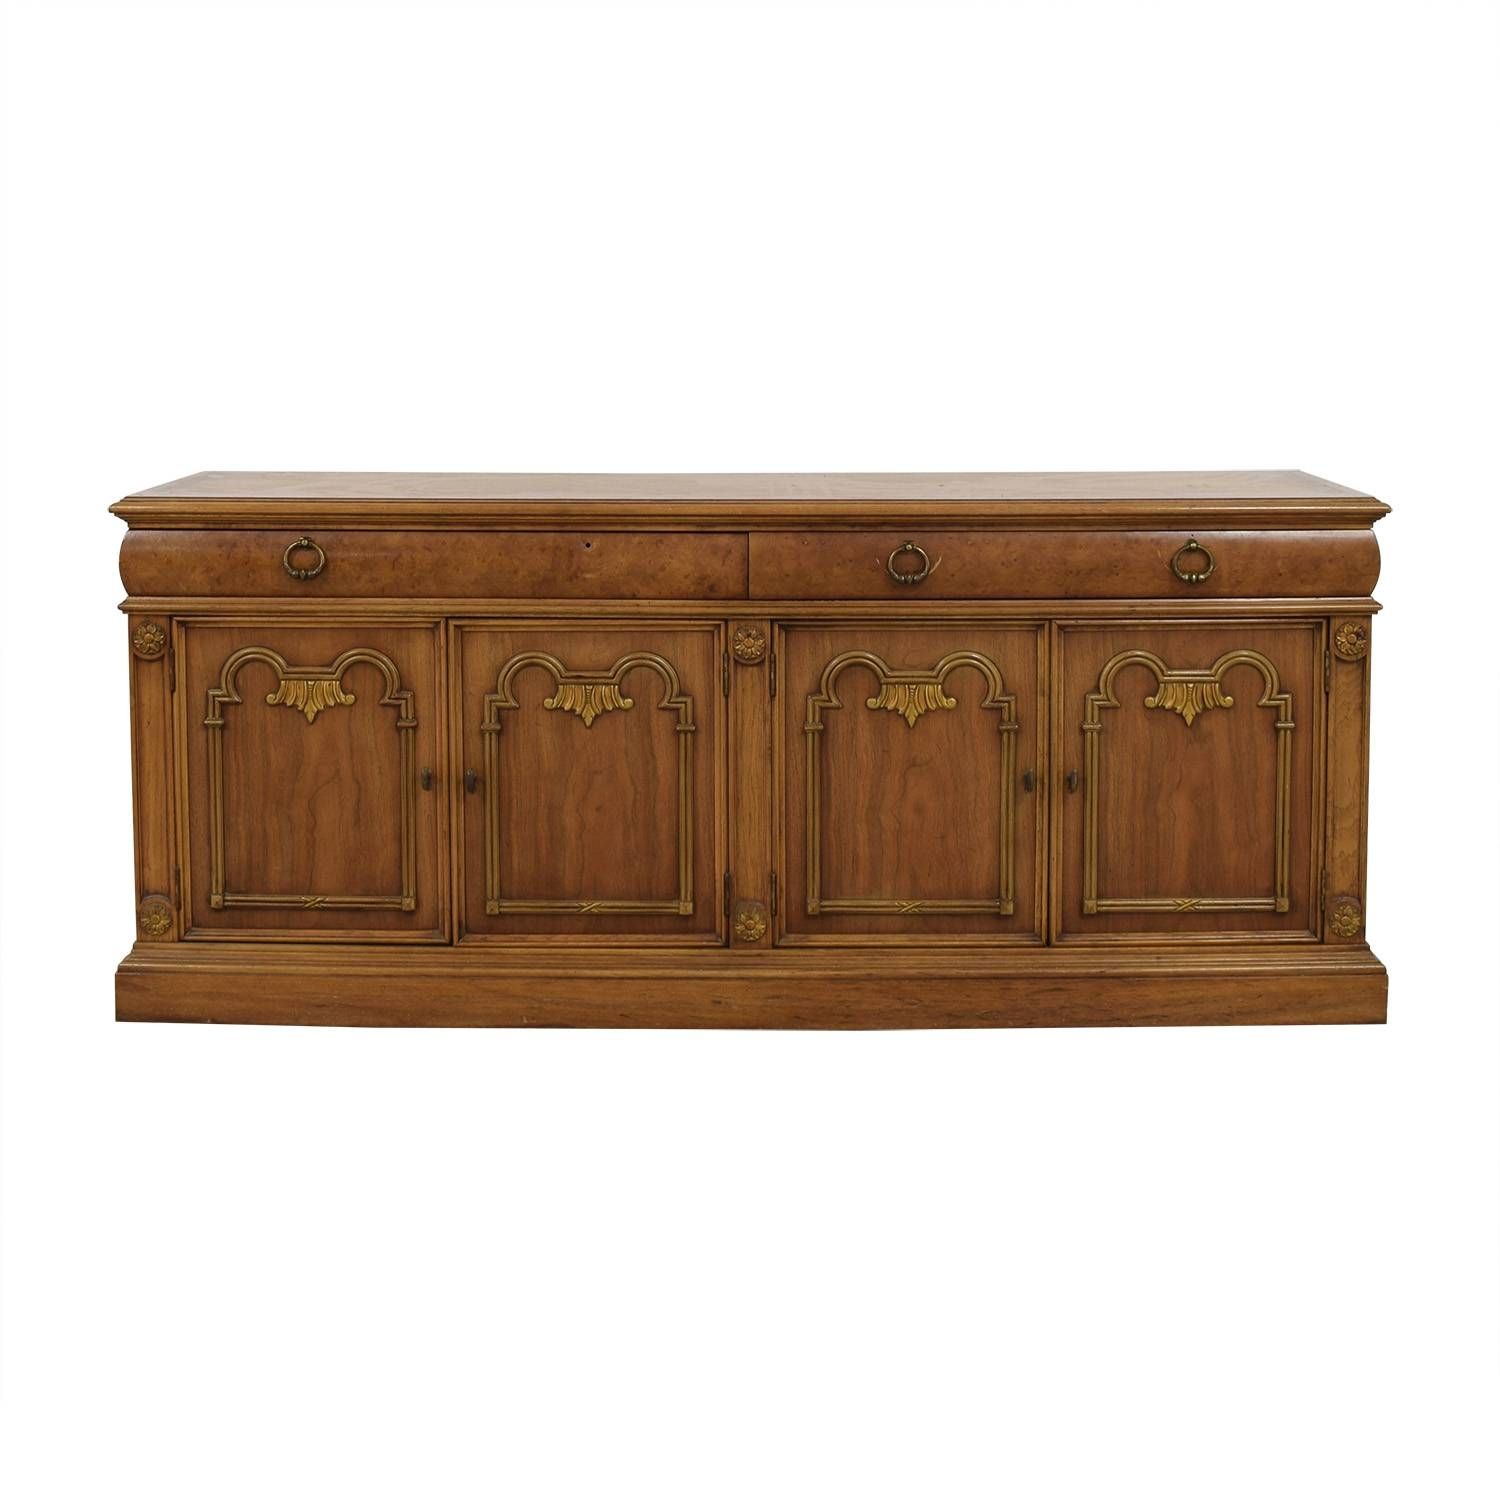 79% Off – Thomasville Thomasville Buffet Storage Cabinet / Storage Pertaining To Most Popular Thomasville Sideboards (Photo 3 of 15)